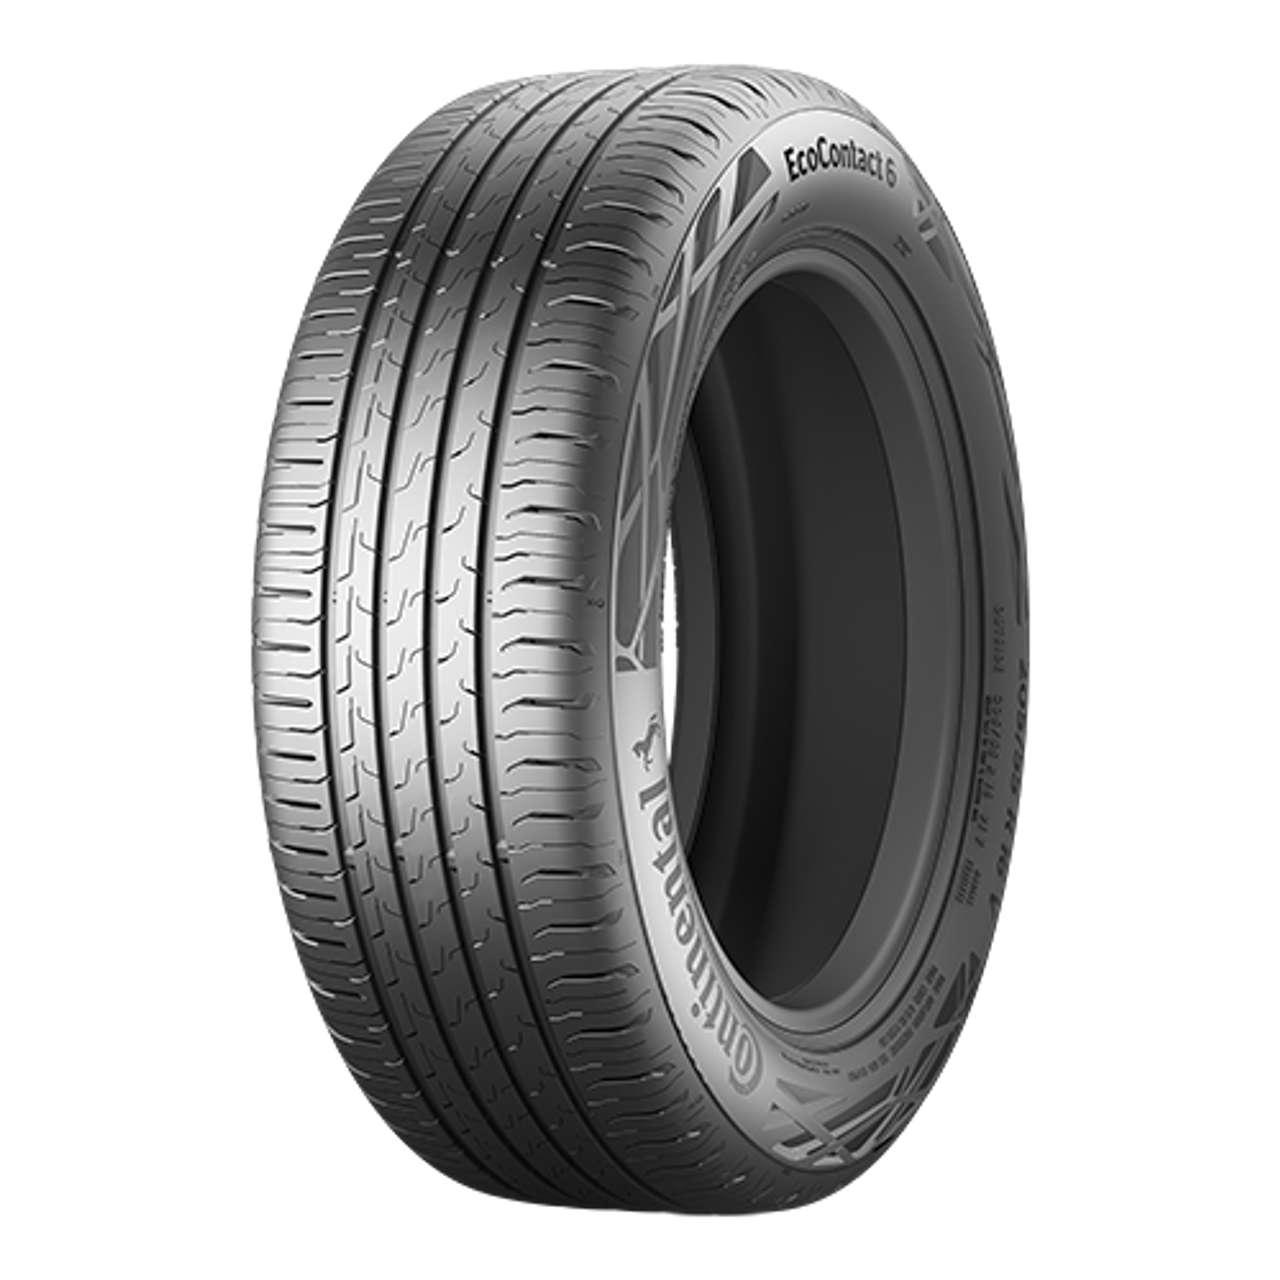 CONTINENTAL ECOCONTACT 6 (REN) 185/65R15 88H 